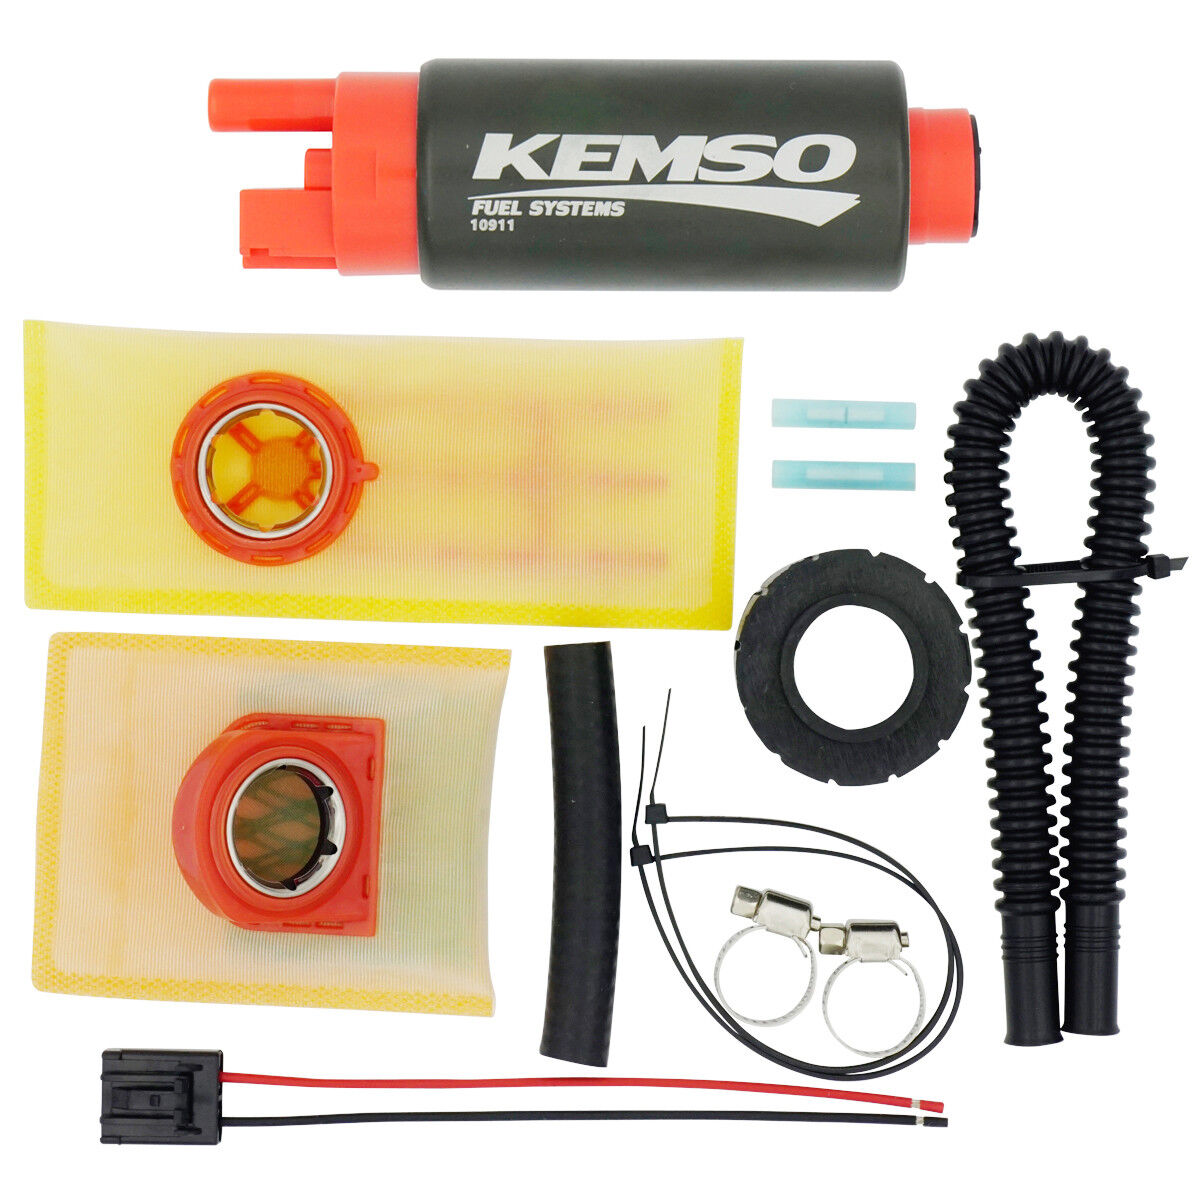 KEMSO 340LPH High Performance Fuel Pump for Dodge Shelby Charger 1985 - 1987